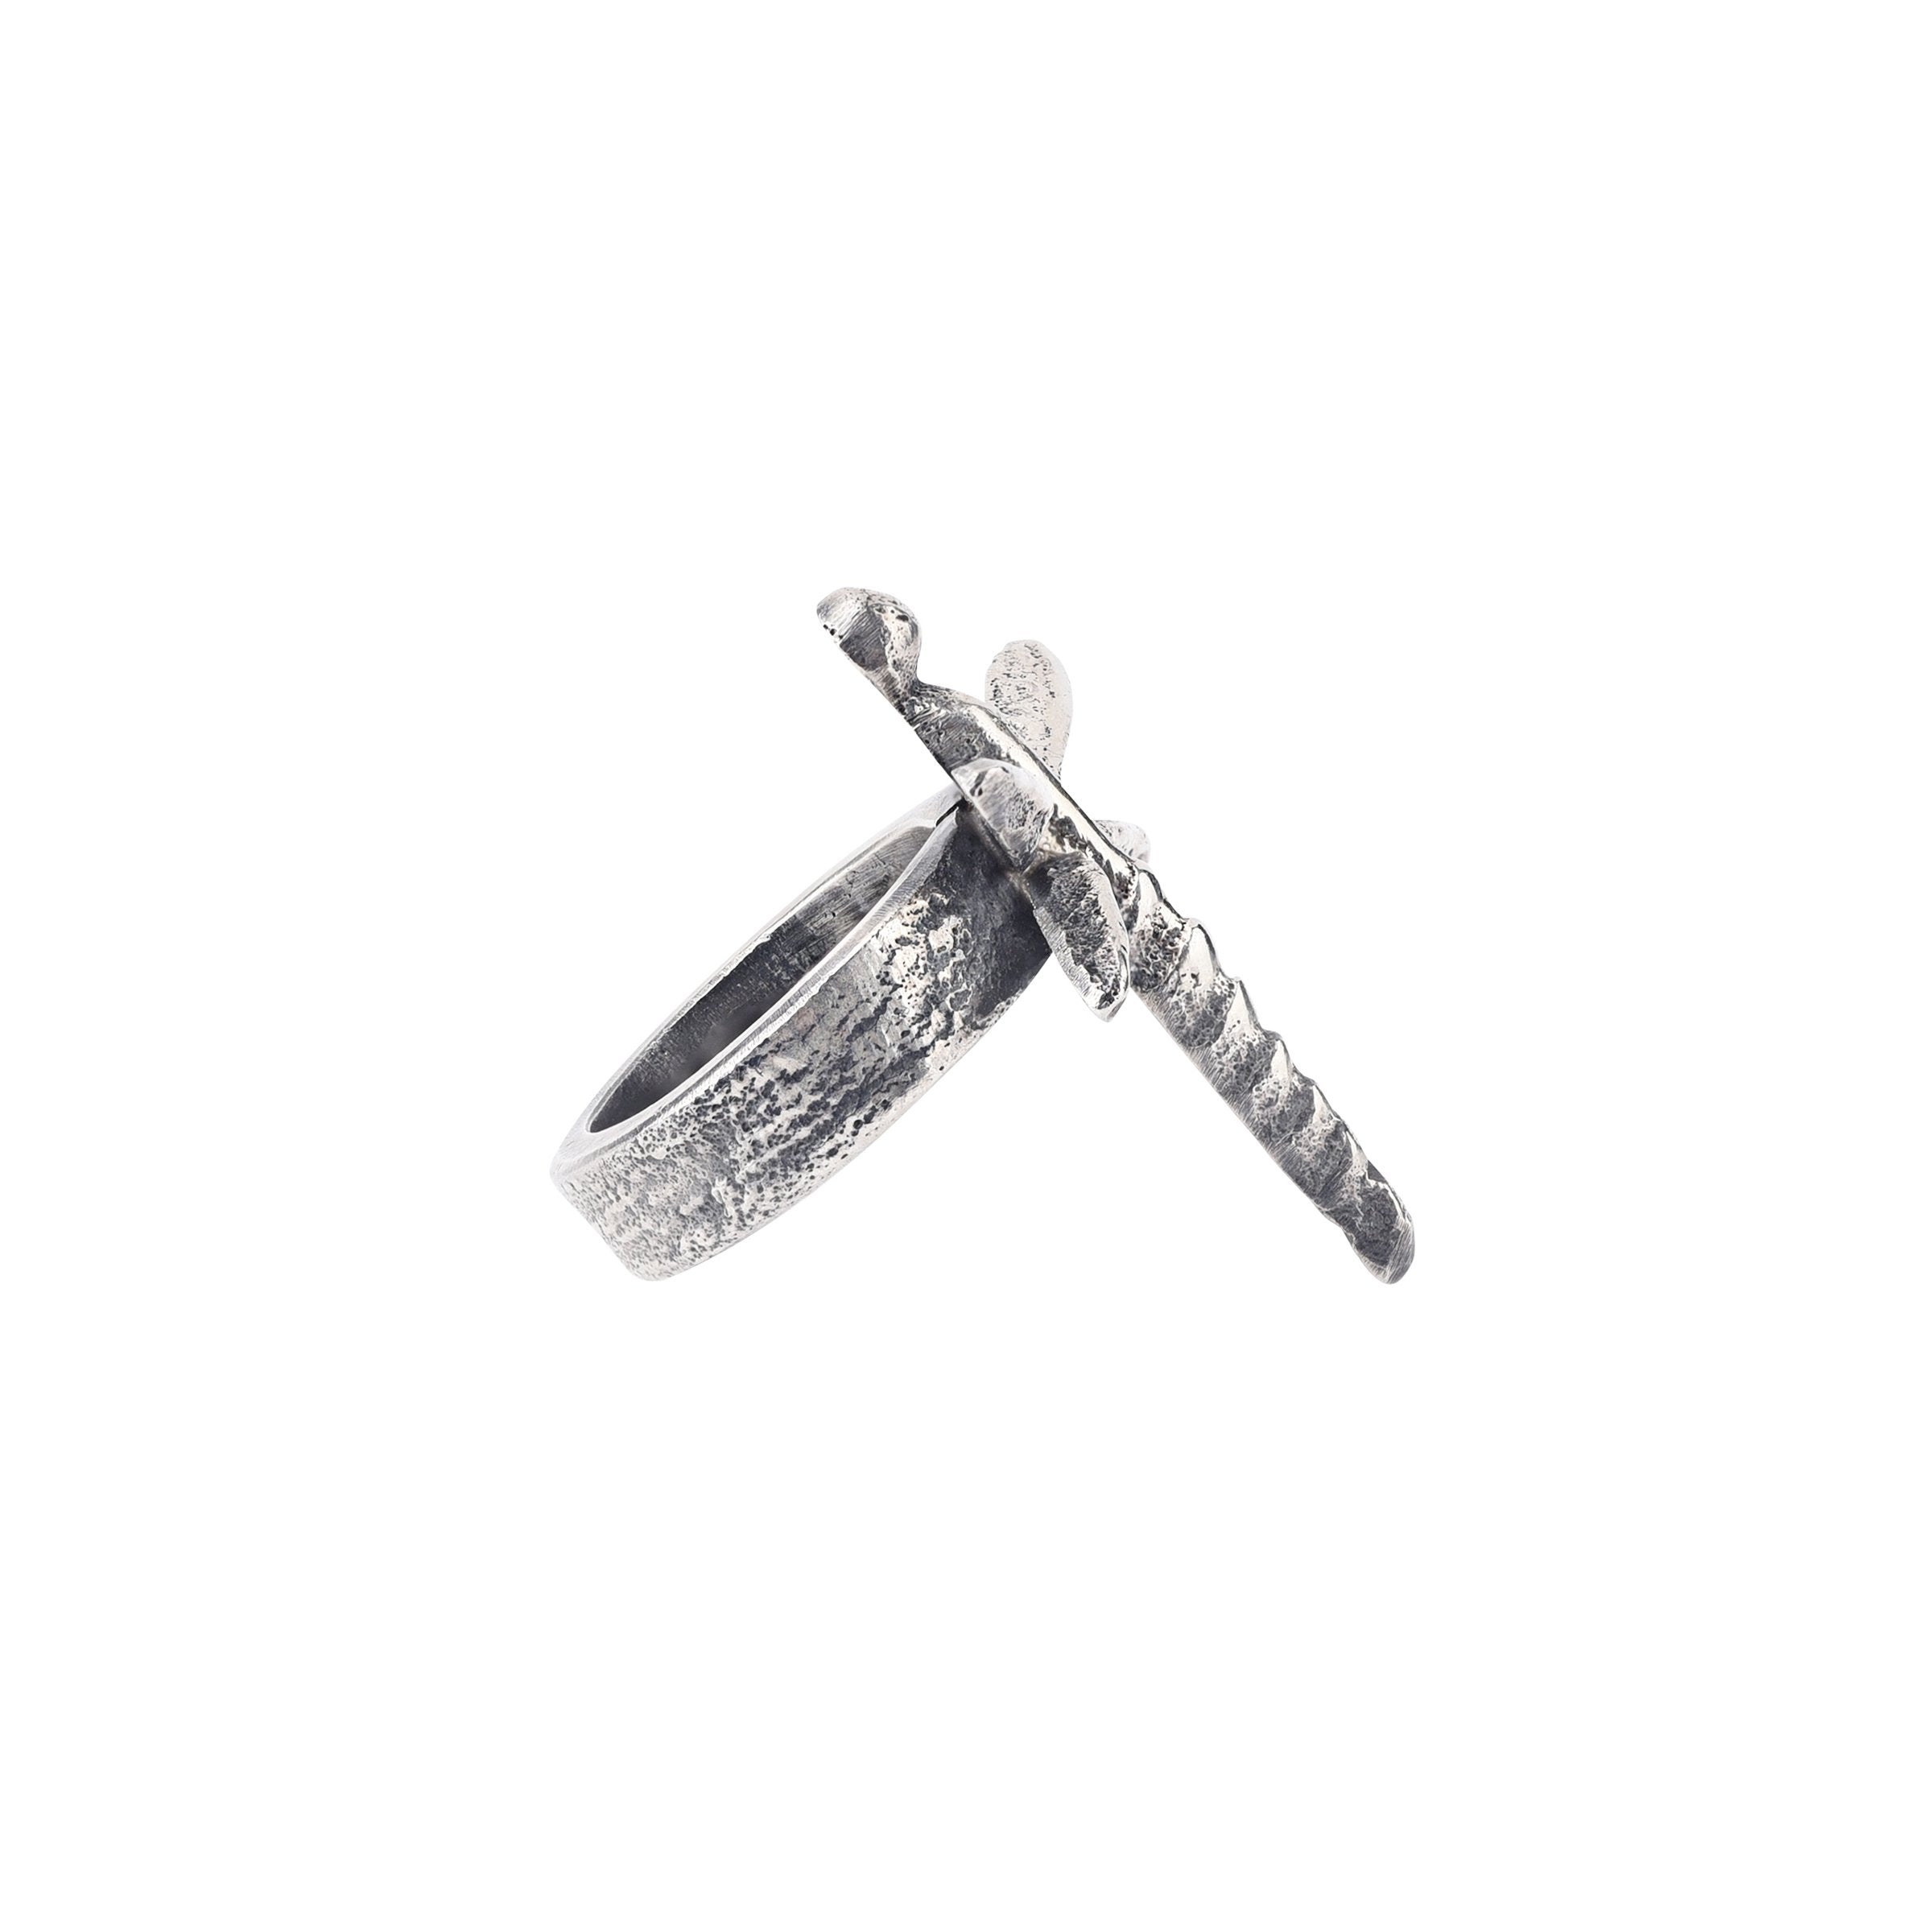 Gary Custer Dragonfly Ring - Size 6 1/2